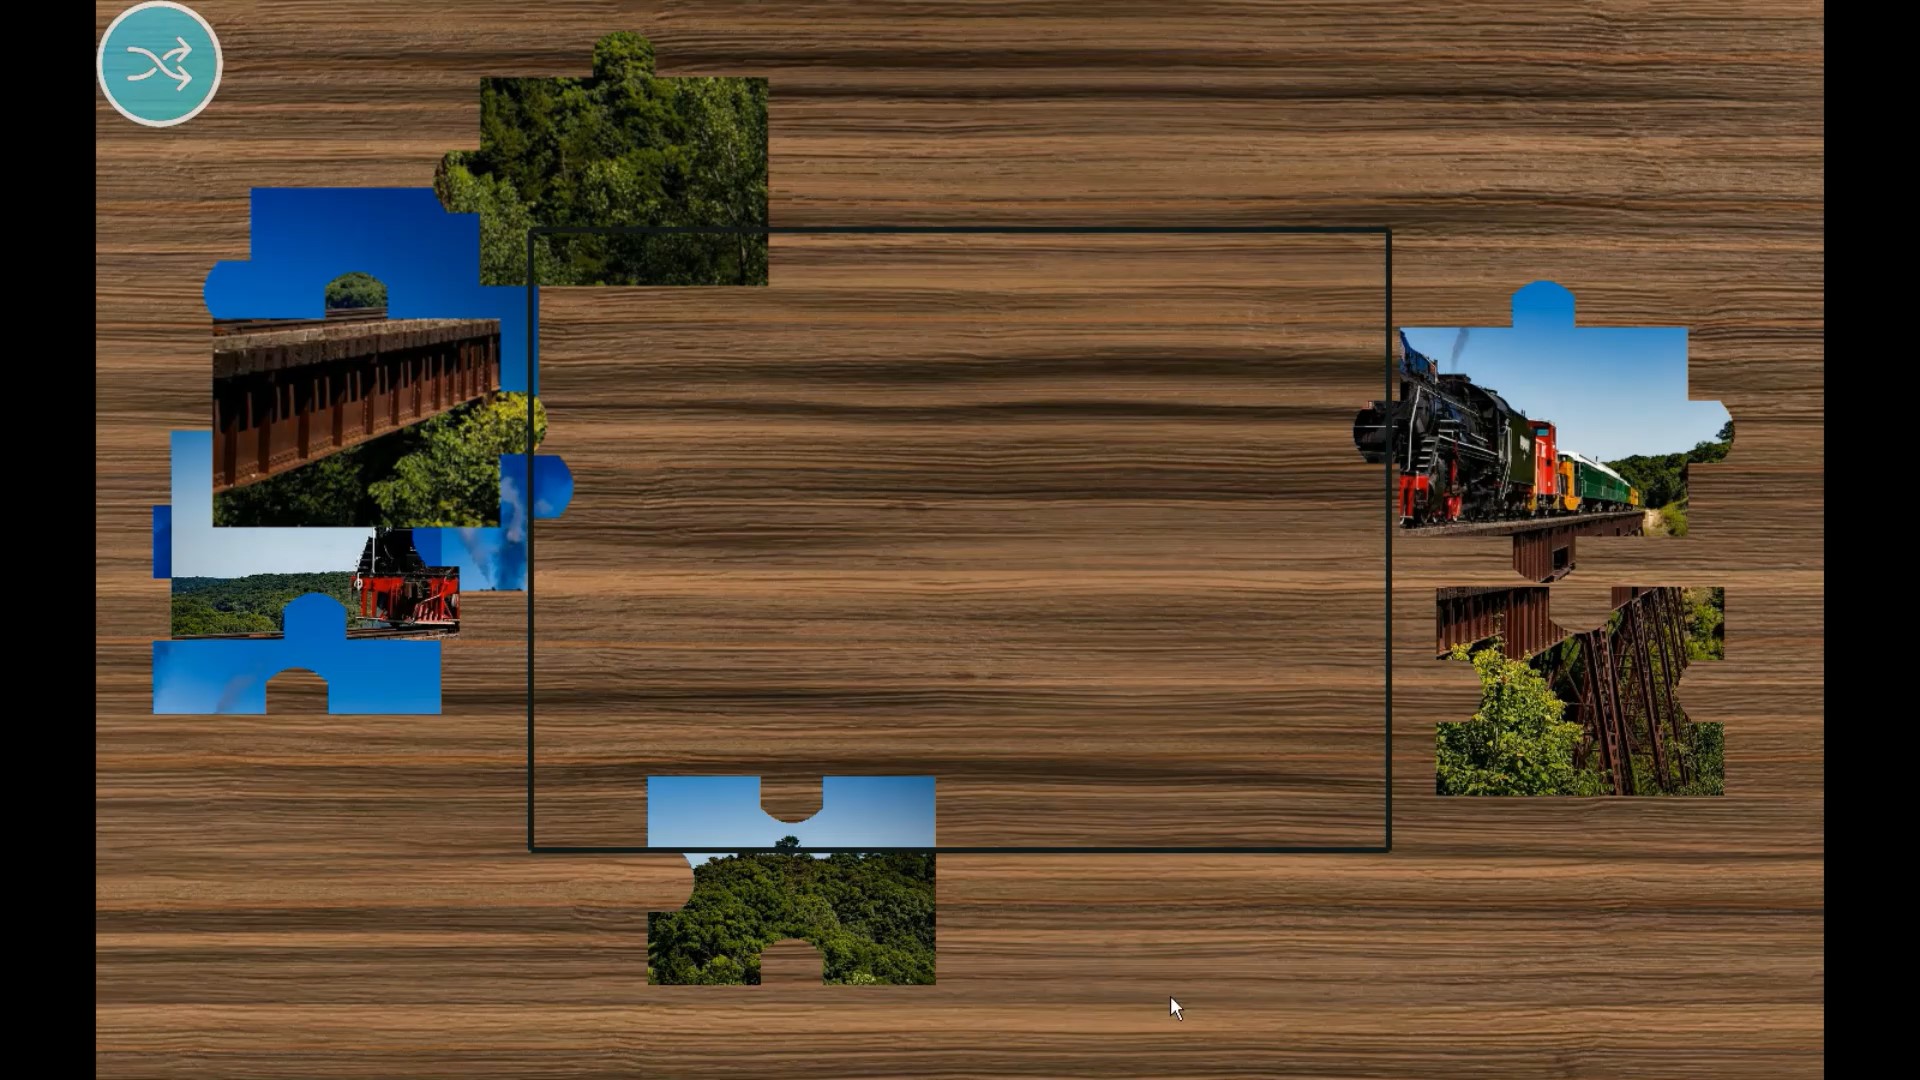 The Jigsaw activity, the image shows jigsaw pieces of a steam train, when the user touches the jigsaw pieces they arrange themselves in the correct place on the board.